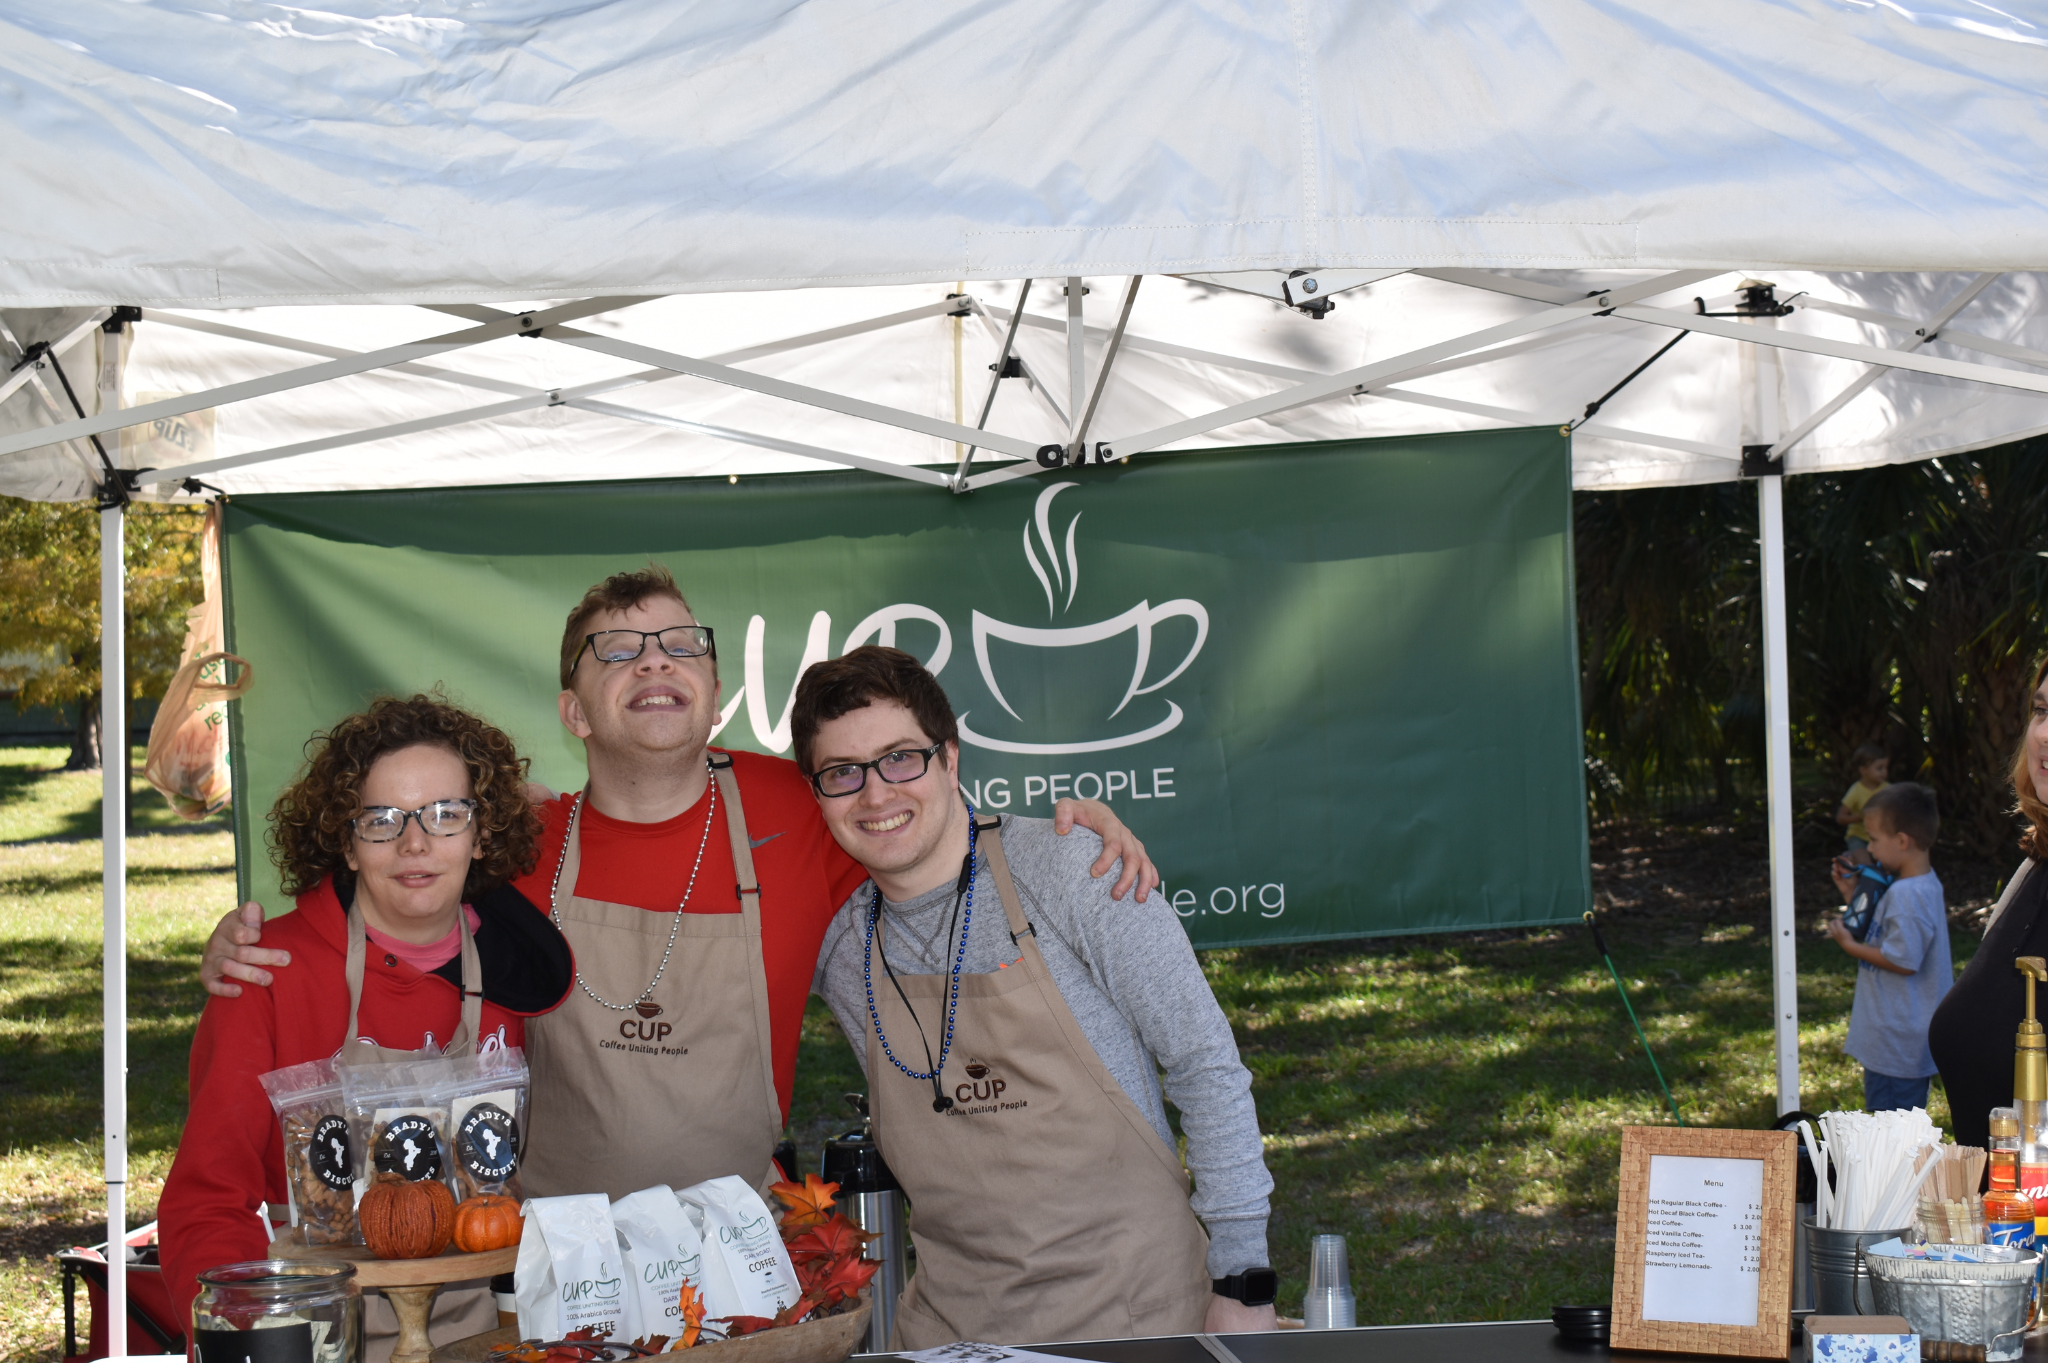 Three CUP employees smiling under a tent